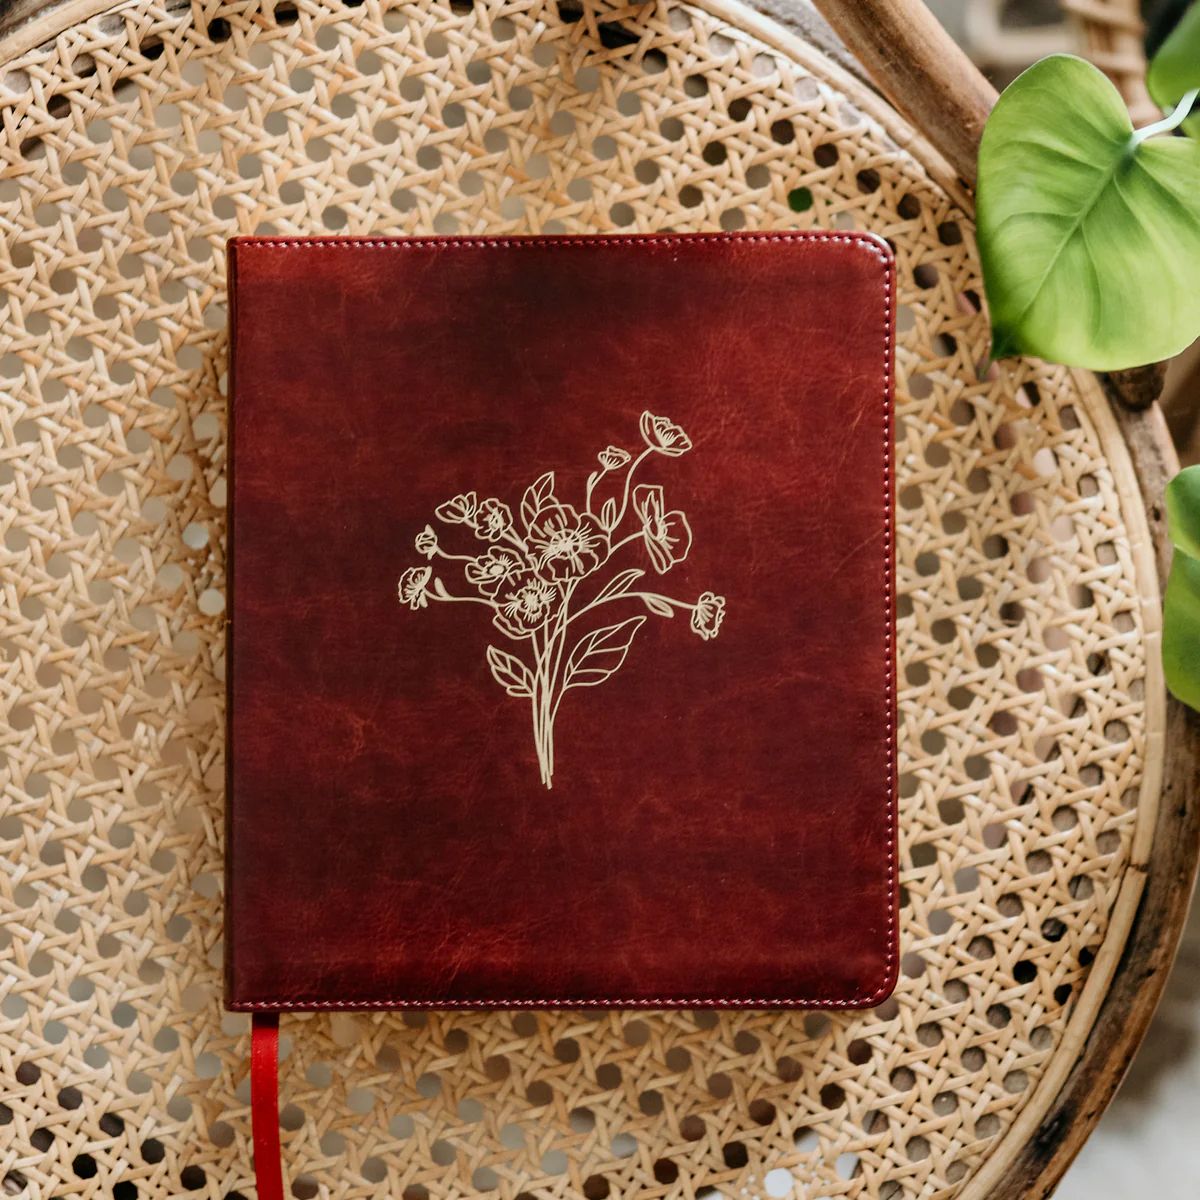 ESV Journaling Bible - Yorkshire | The Daily Grace Co.